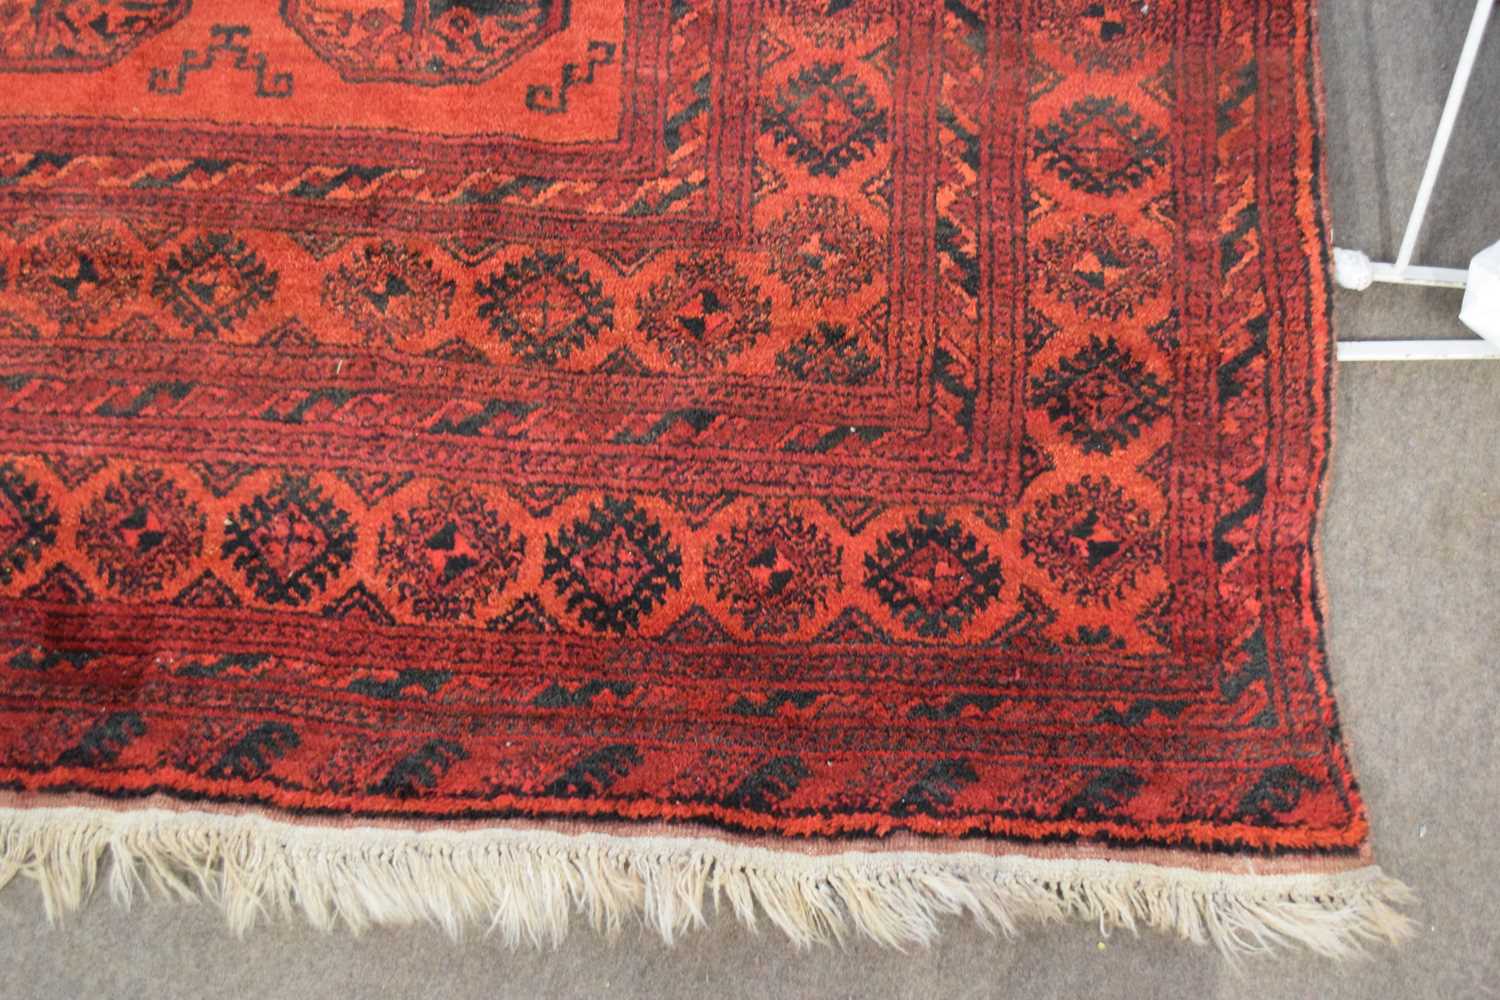 Large 20th century Bokhara type floor rug decorated with lozenges on a red background with a - Image 3 of 8